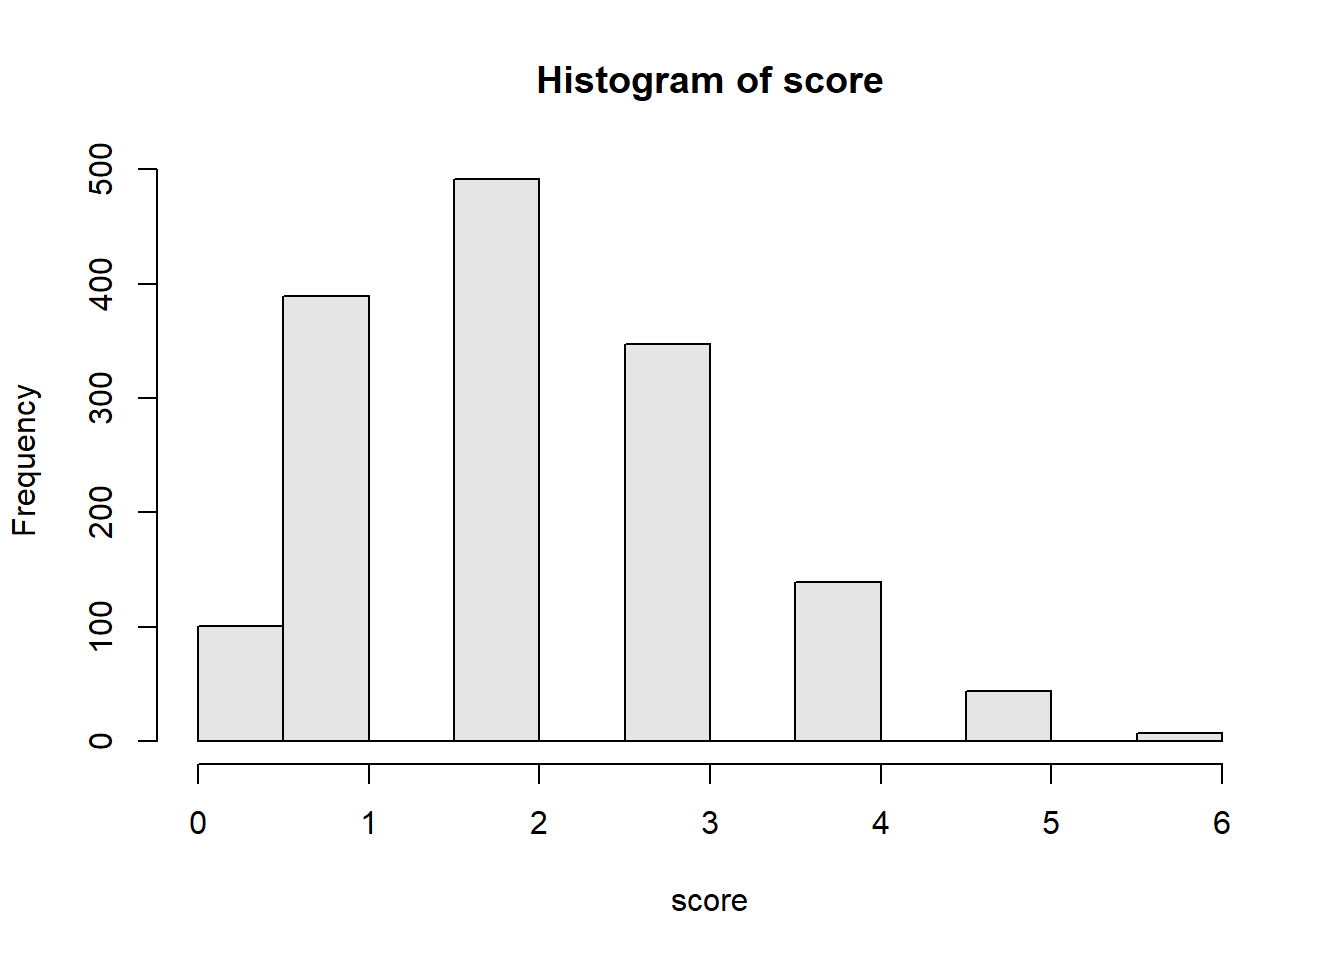 Distribution of the genetic score used to predict case/control status in the asthma example.